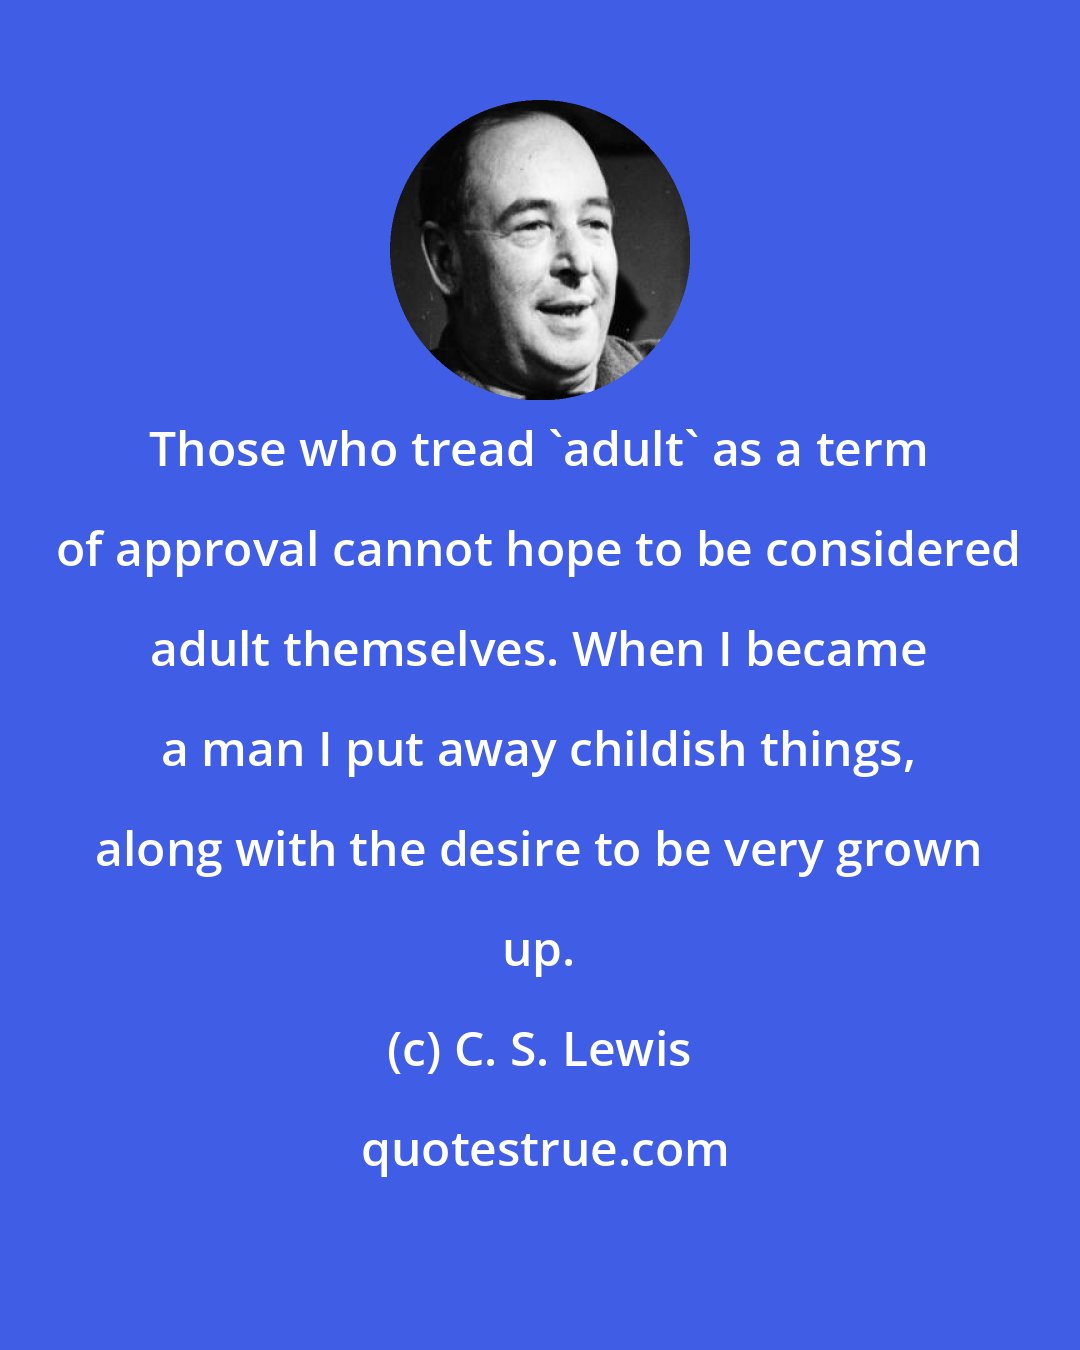 C. S. Lewis: Those who tread 'adult' as a term of approval cannot hope to be considered adult themselves. When I became a man I put away childish things, along with the desire to be very grown up.